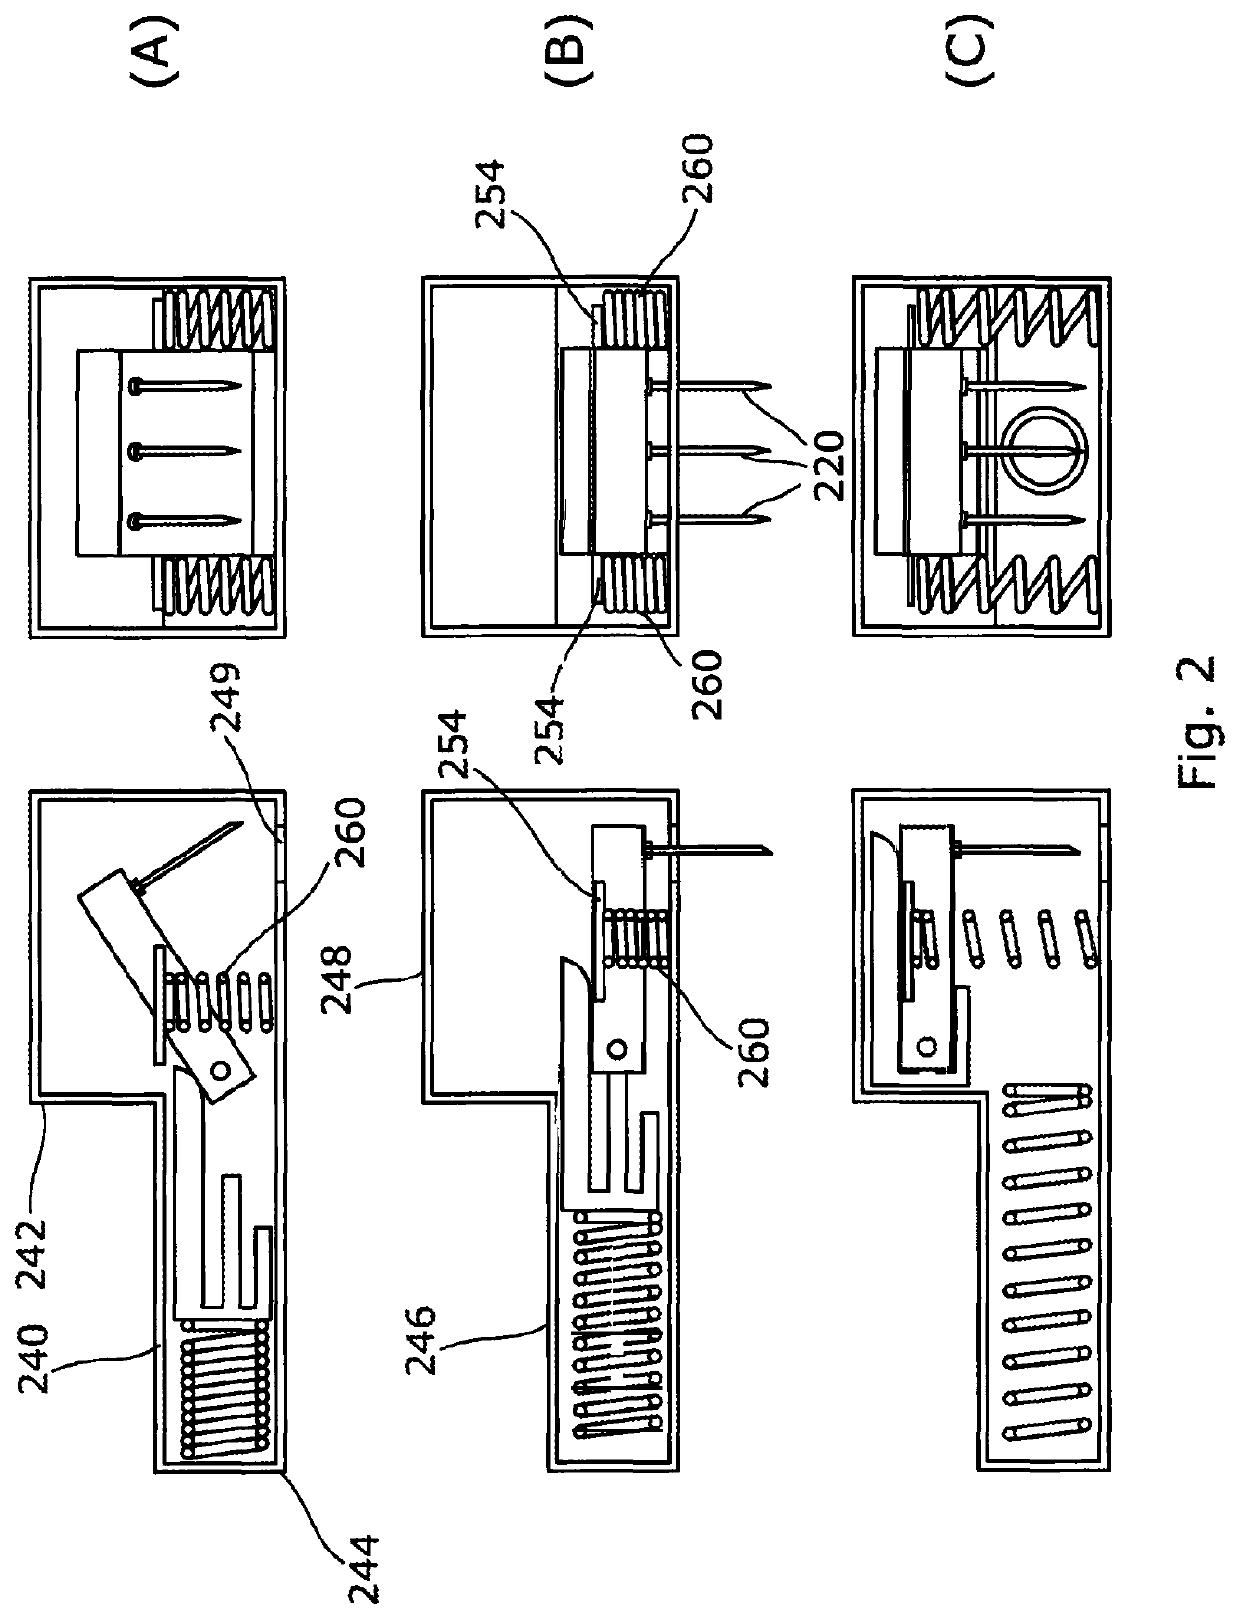 Spring driven injector apparatus with needle insertion